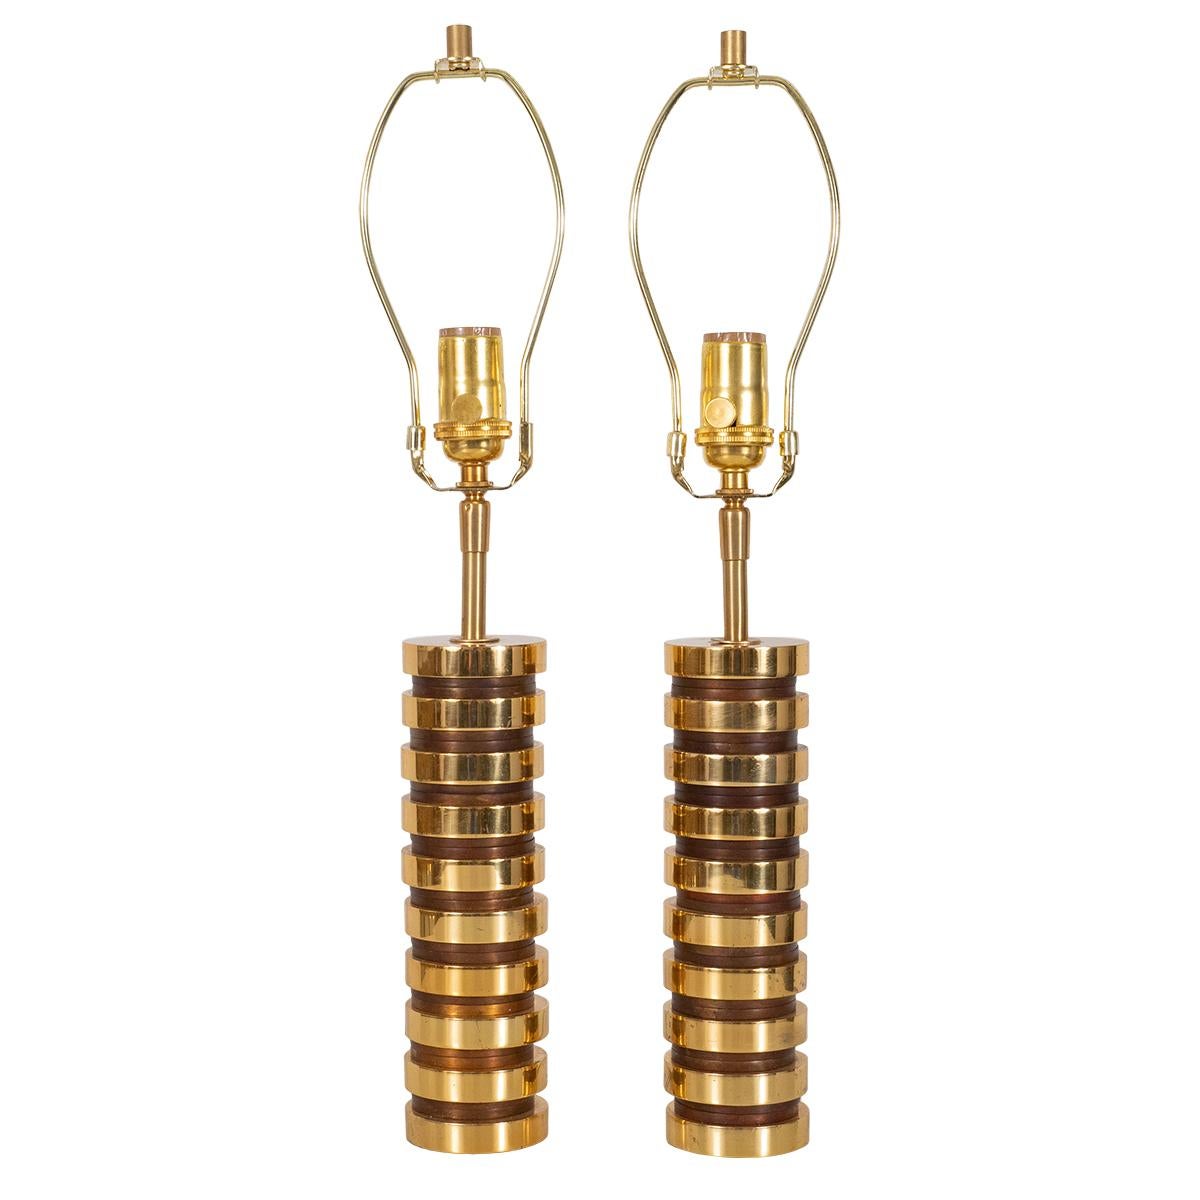 Pair of petite cylindrical machined brass table lamps.